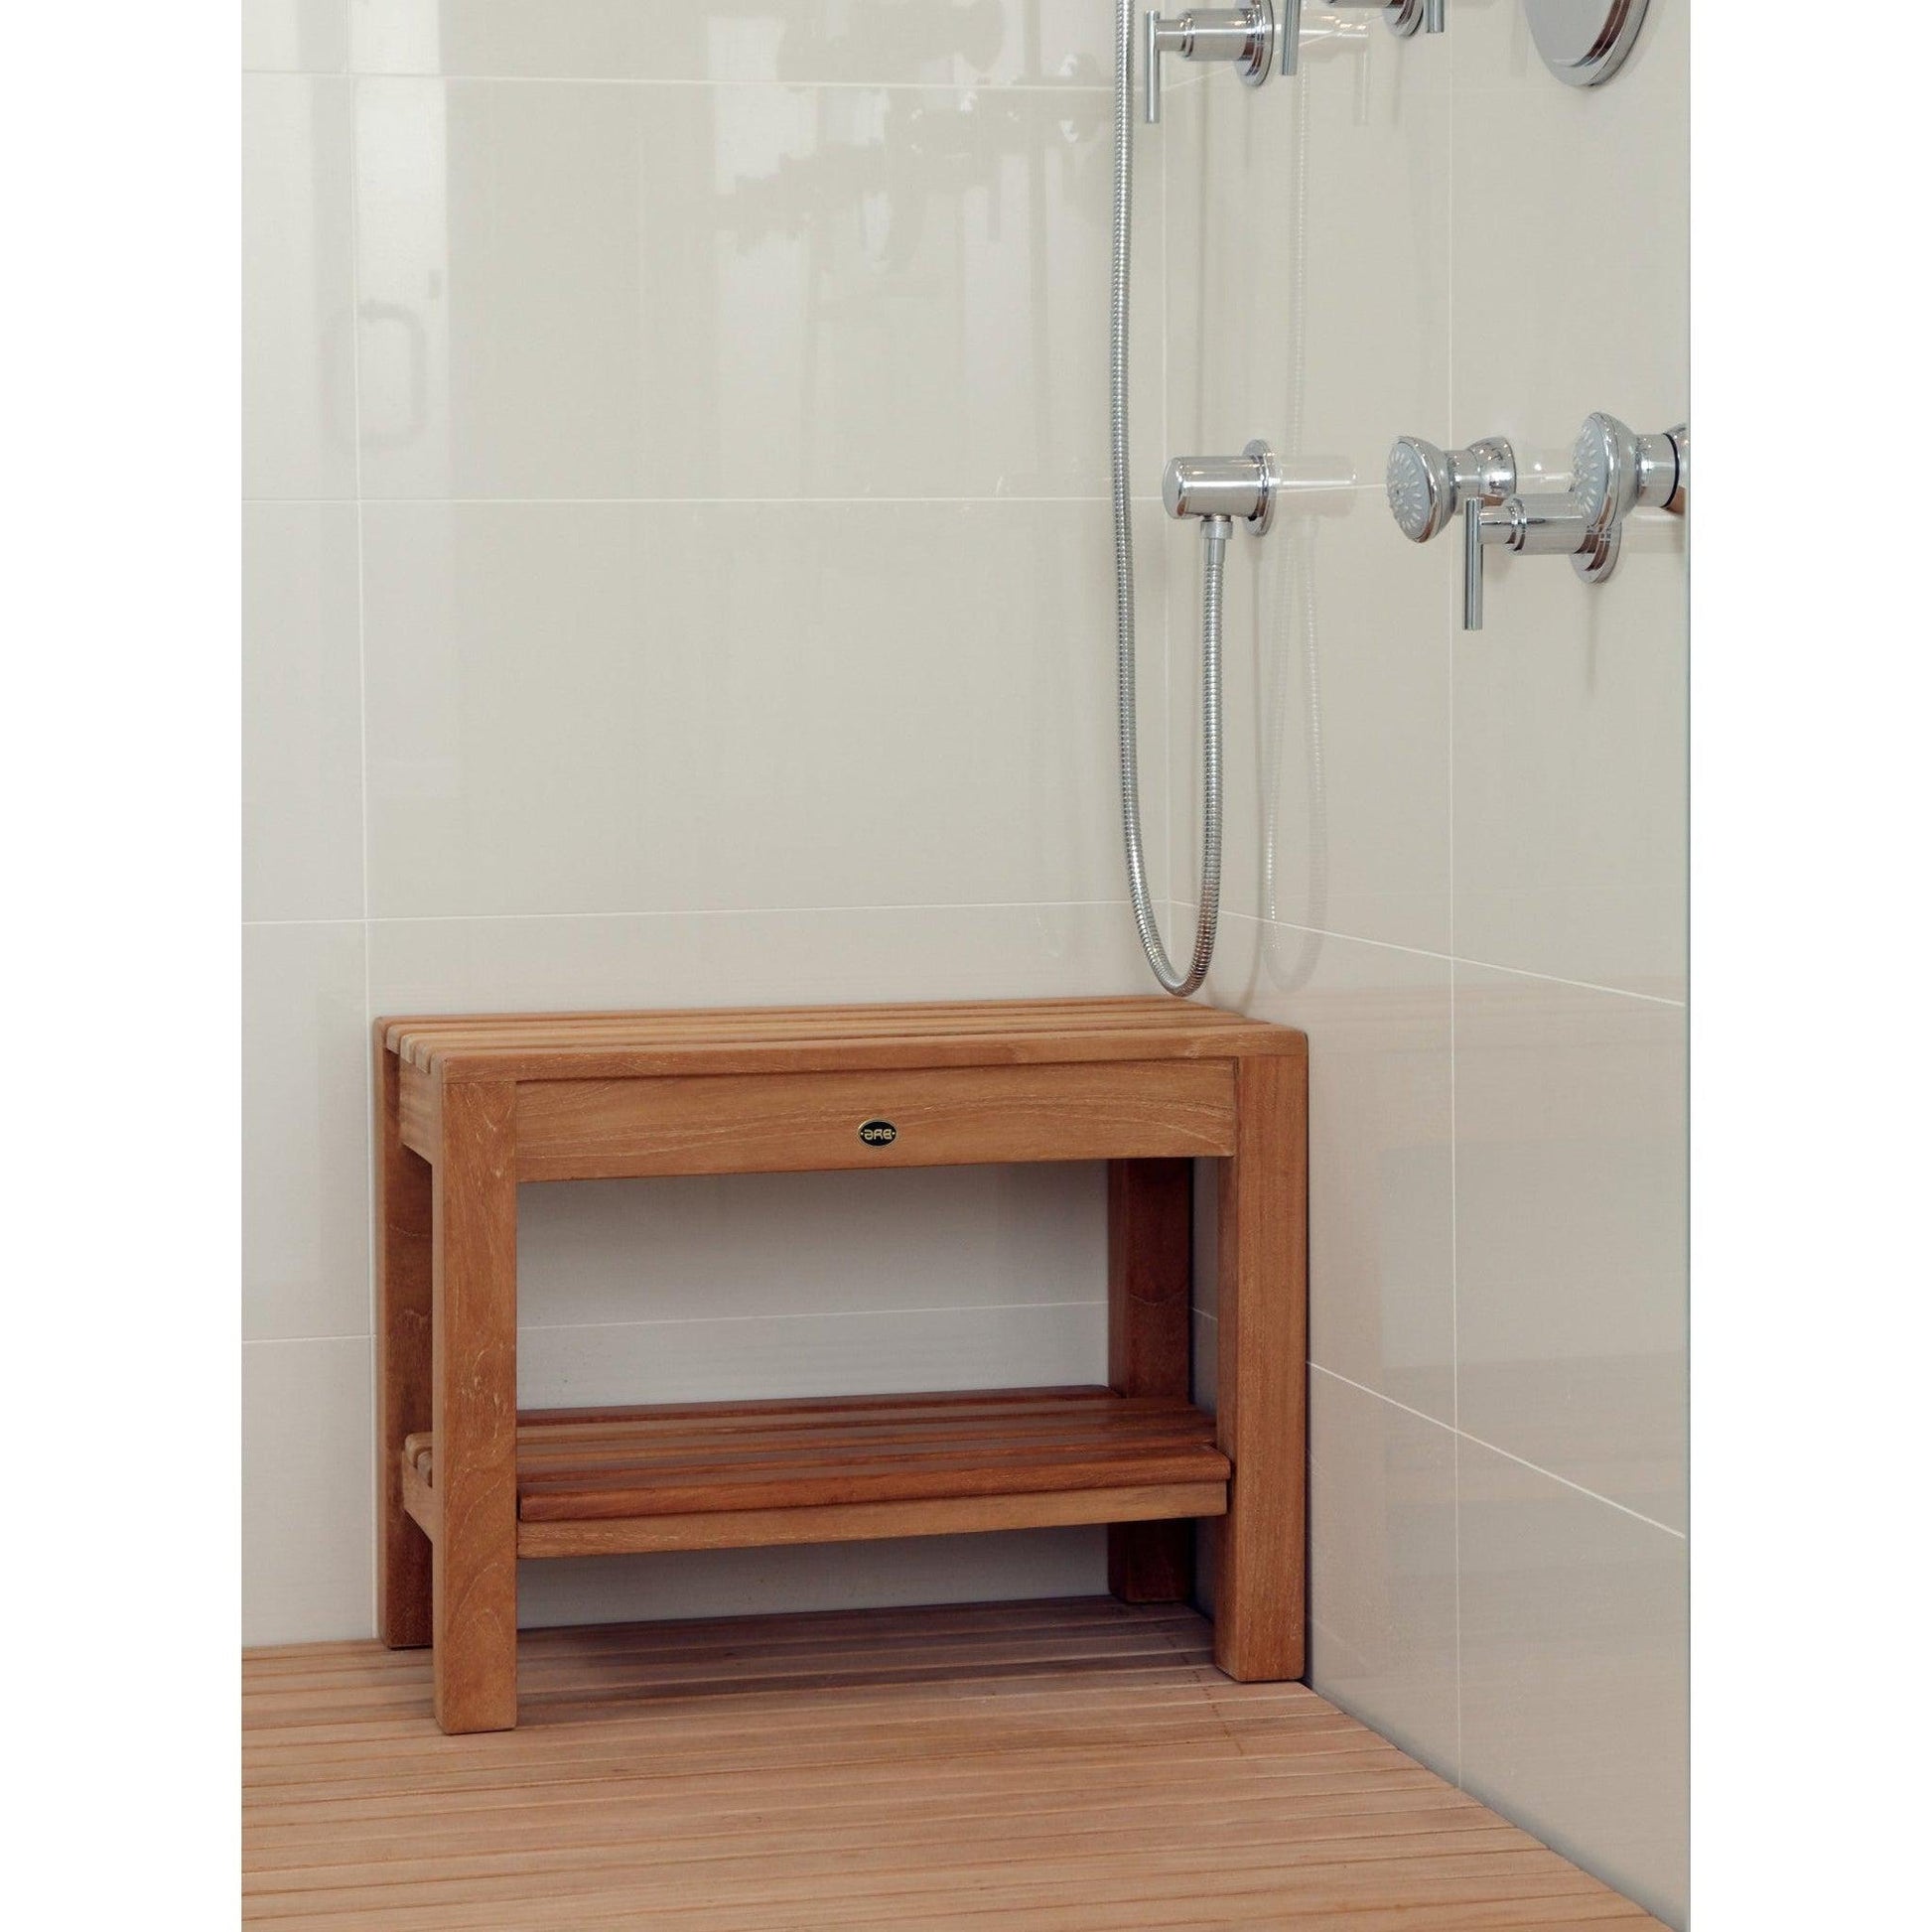 ARB Teak & Specialties Coach 24" Solid Teak Wood Shower Bench With Removable Shelf